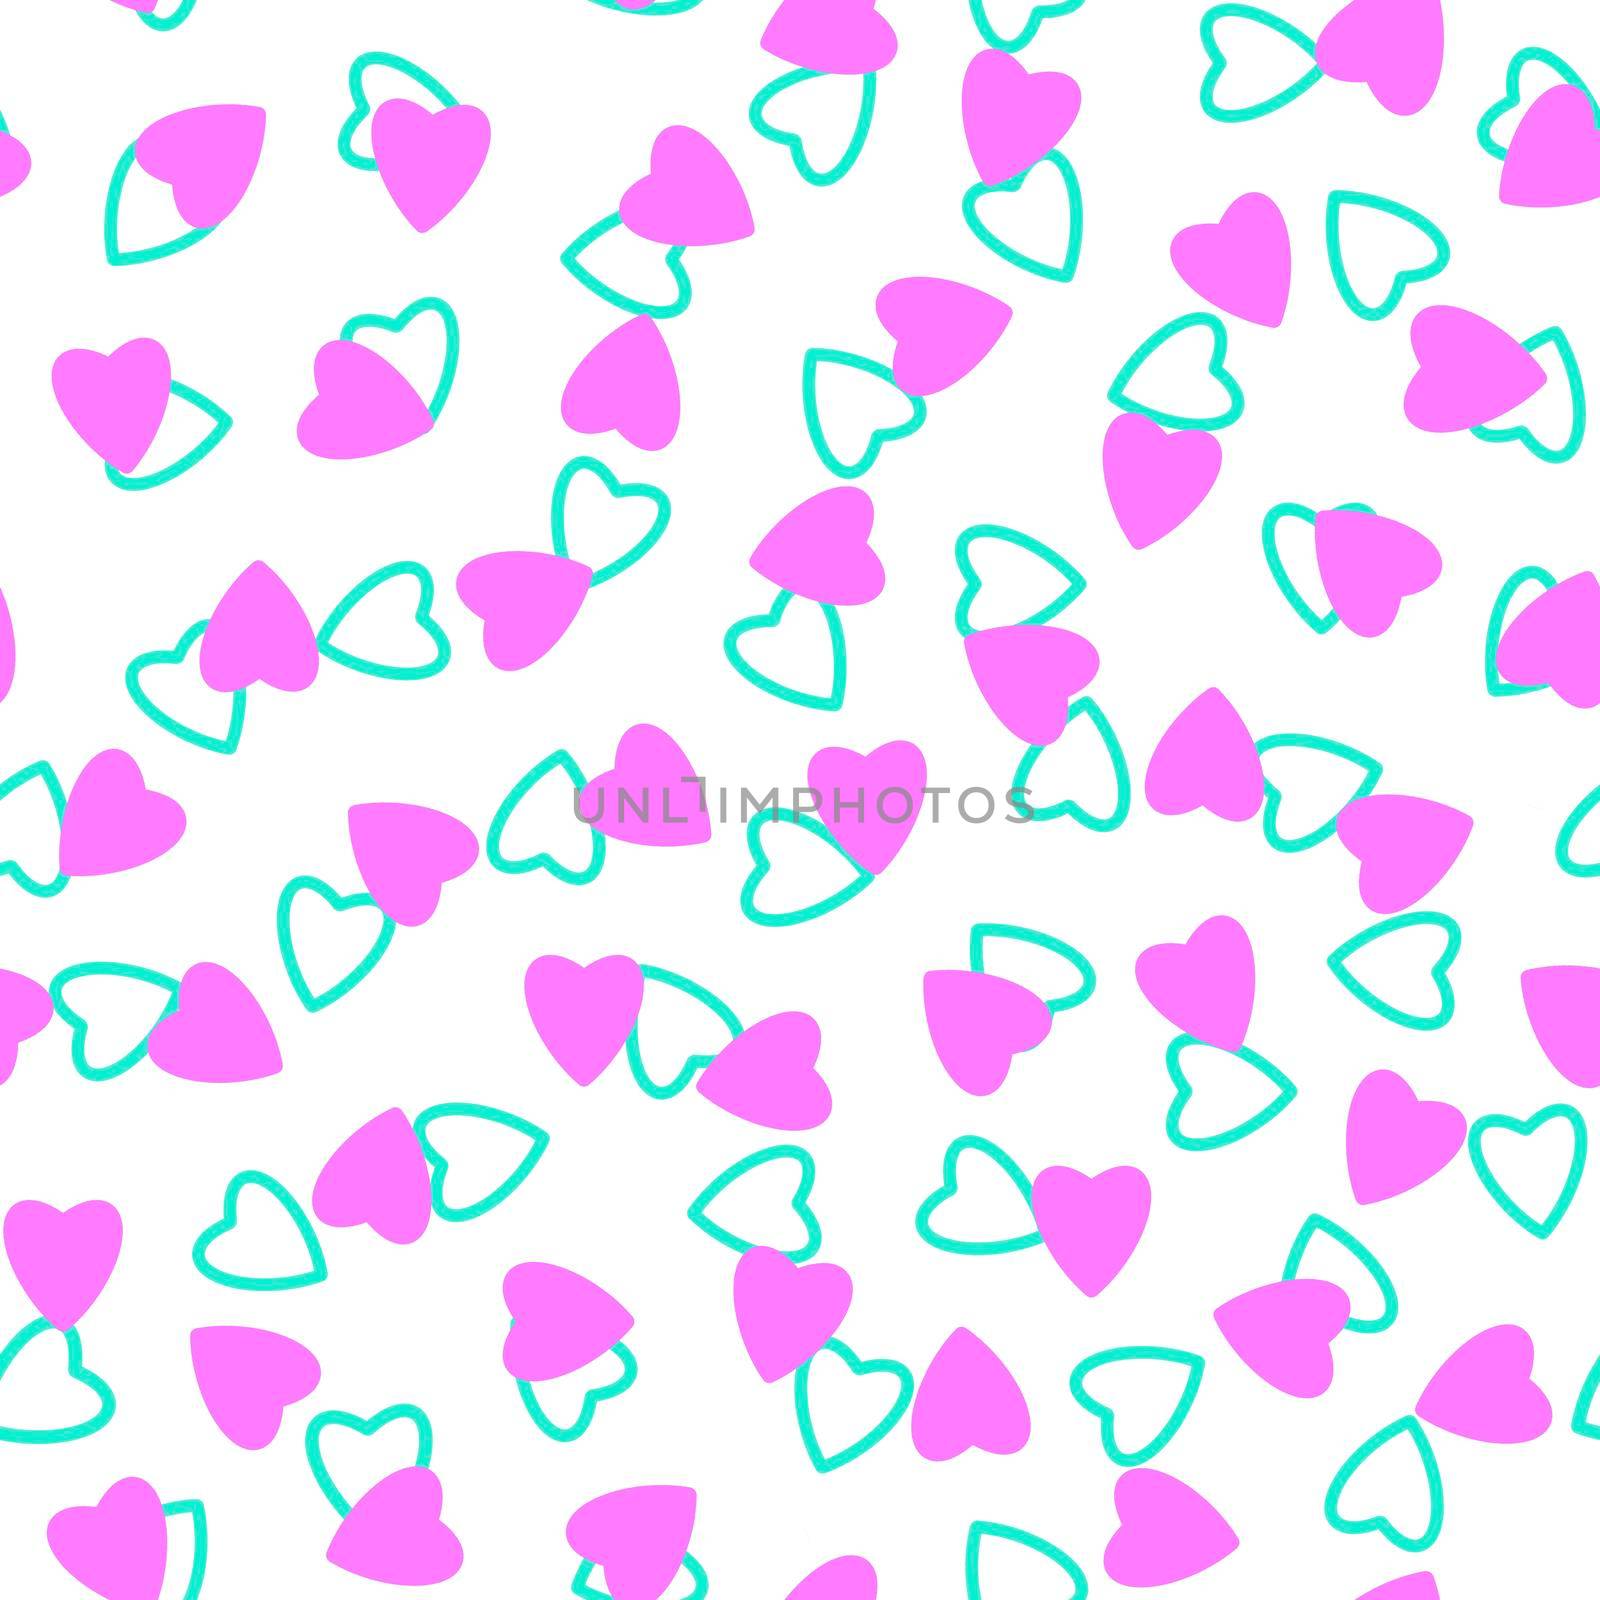 Simple heart seamless pattern,endless chaotic texture made of tiny heart silhouettes.Valentines,mothers day background.Great for Easter,wedding,scrapbook,gift wrapping paper,textiles.Lilac,azure,white by Angelsmoon